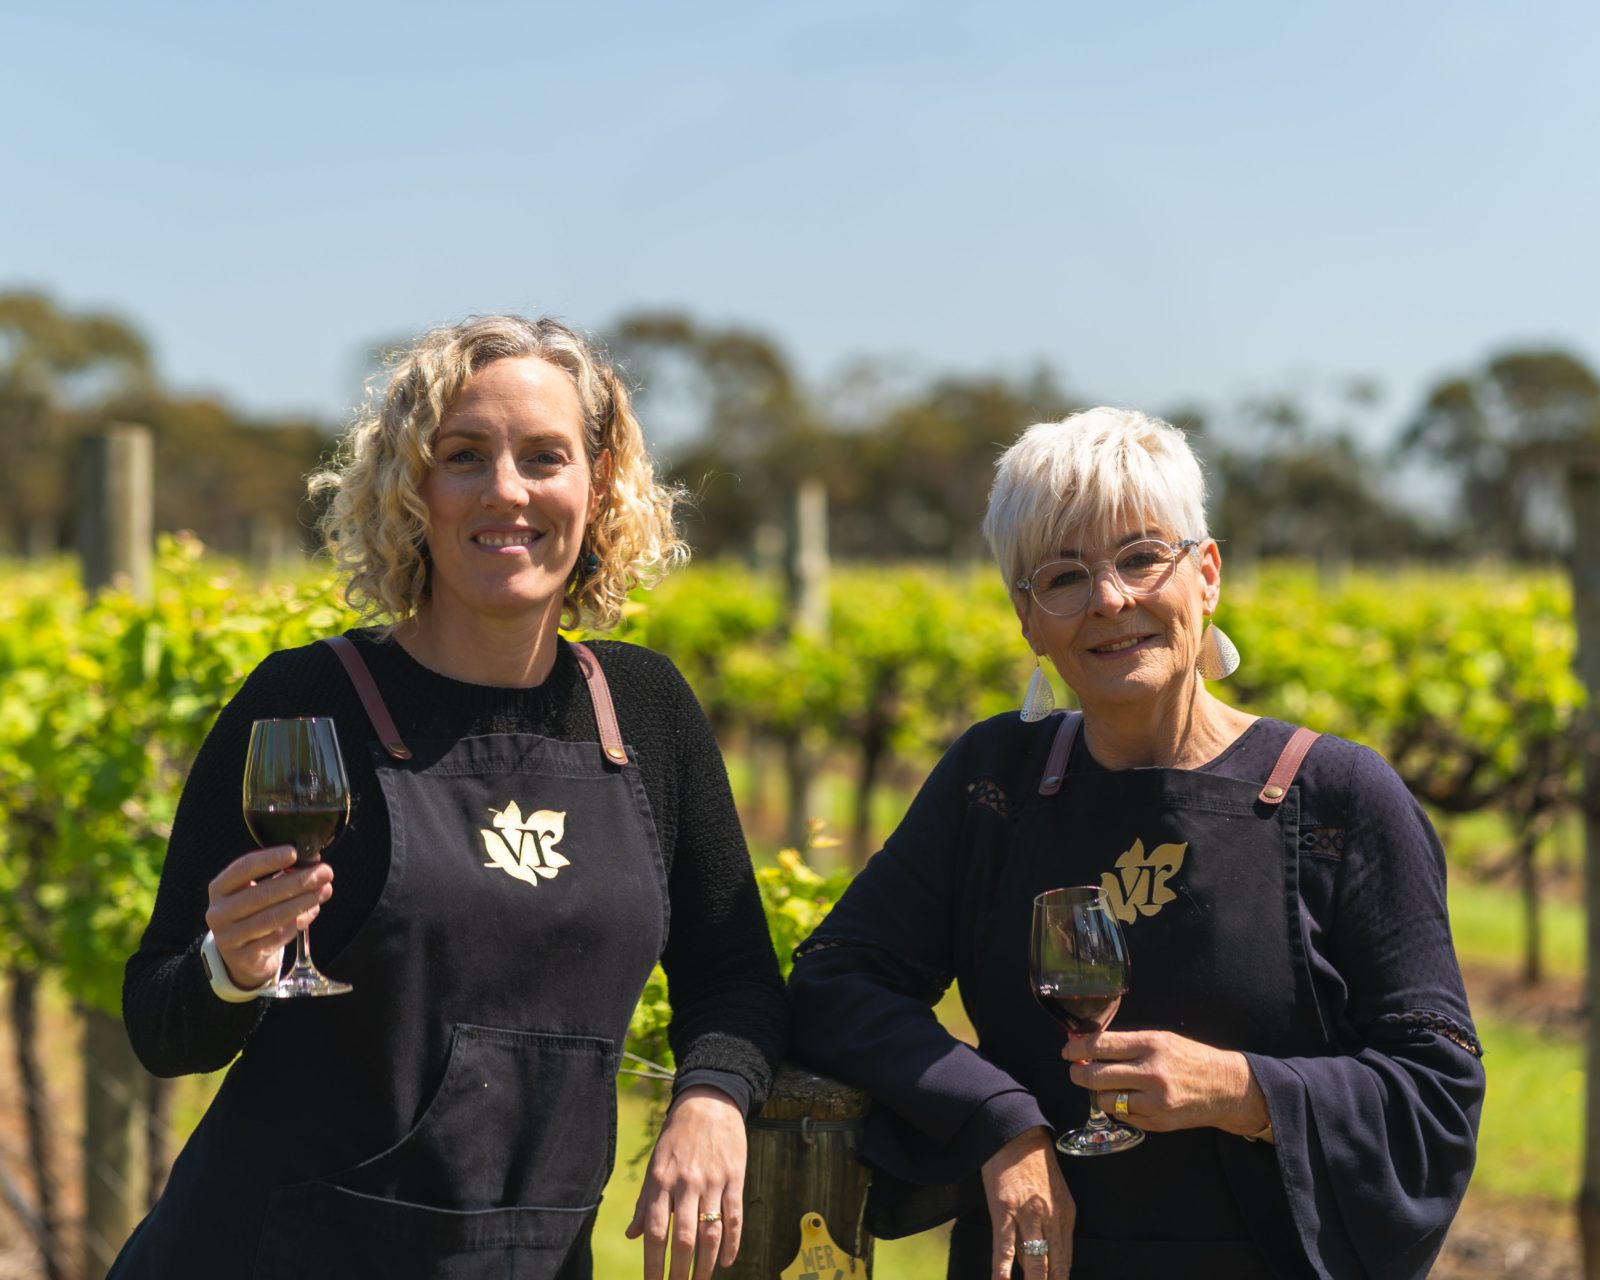 Two ladies standing in a vineyard holding a glass of wine